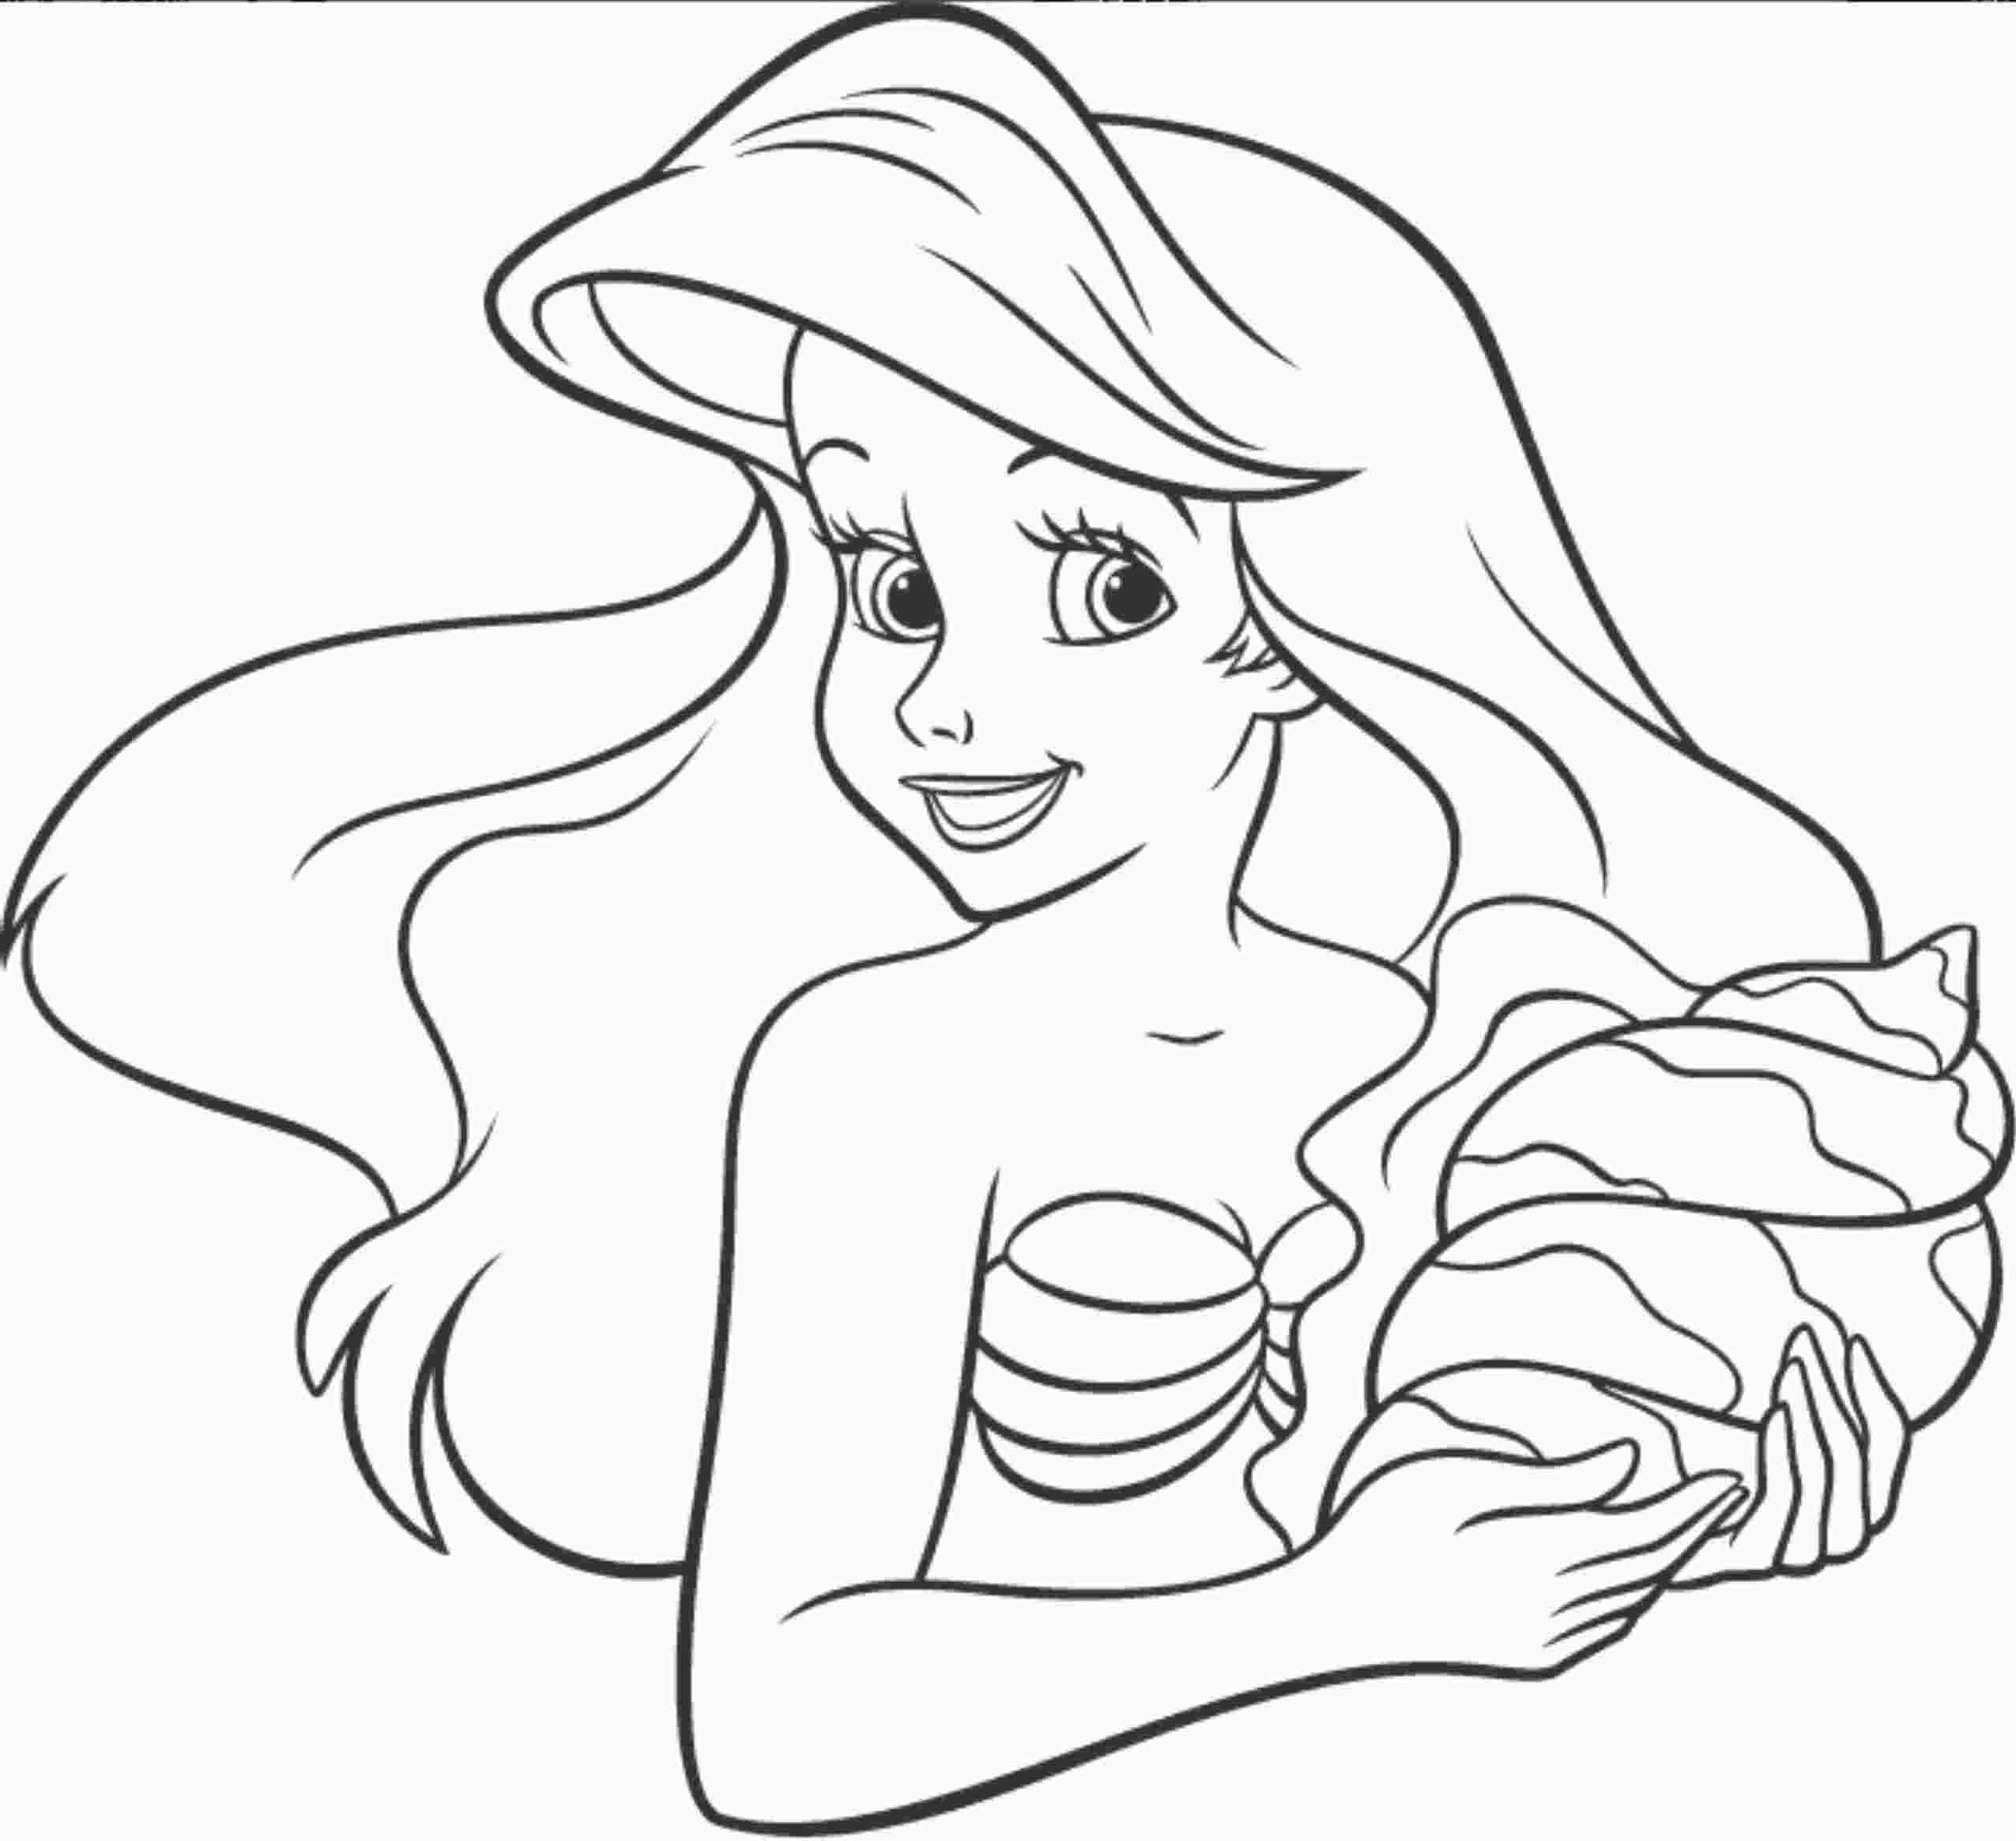 6 Pics of Little Mermaid Coloring Pages Printable - Little Mermaid ...